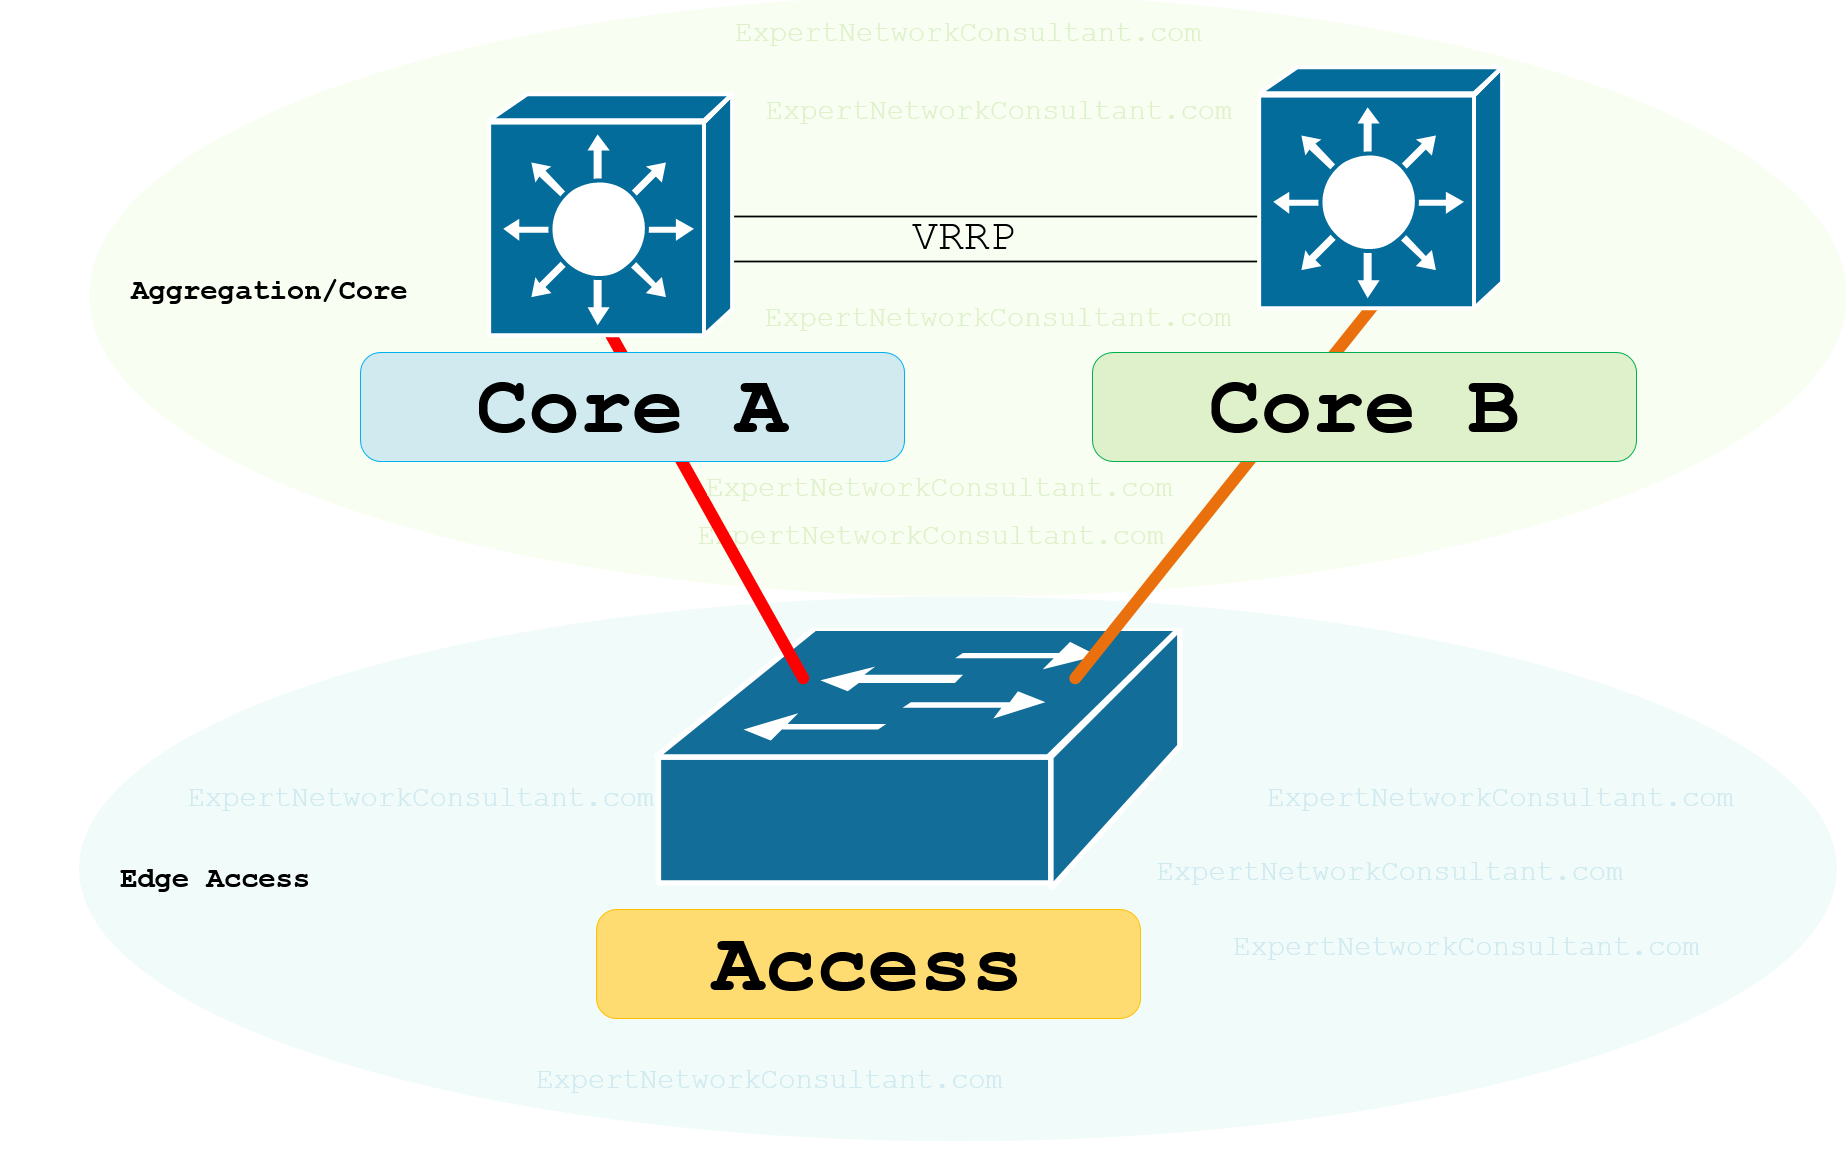 Routed Network Design Access Switch Local VLANS to Core Switches with VRRP or HSRP Redundancies